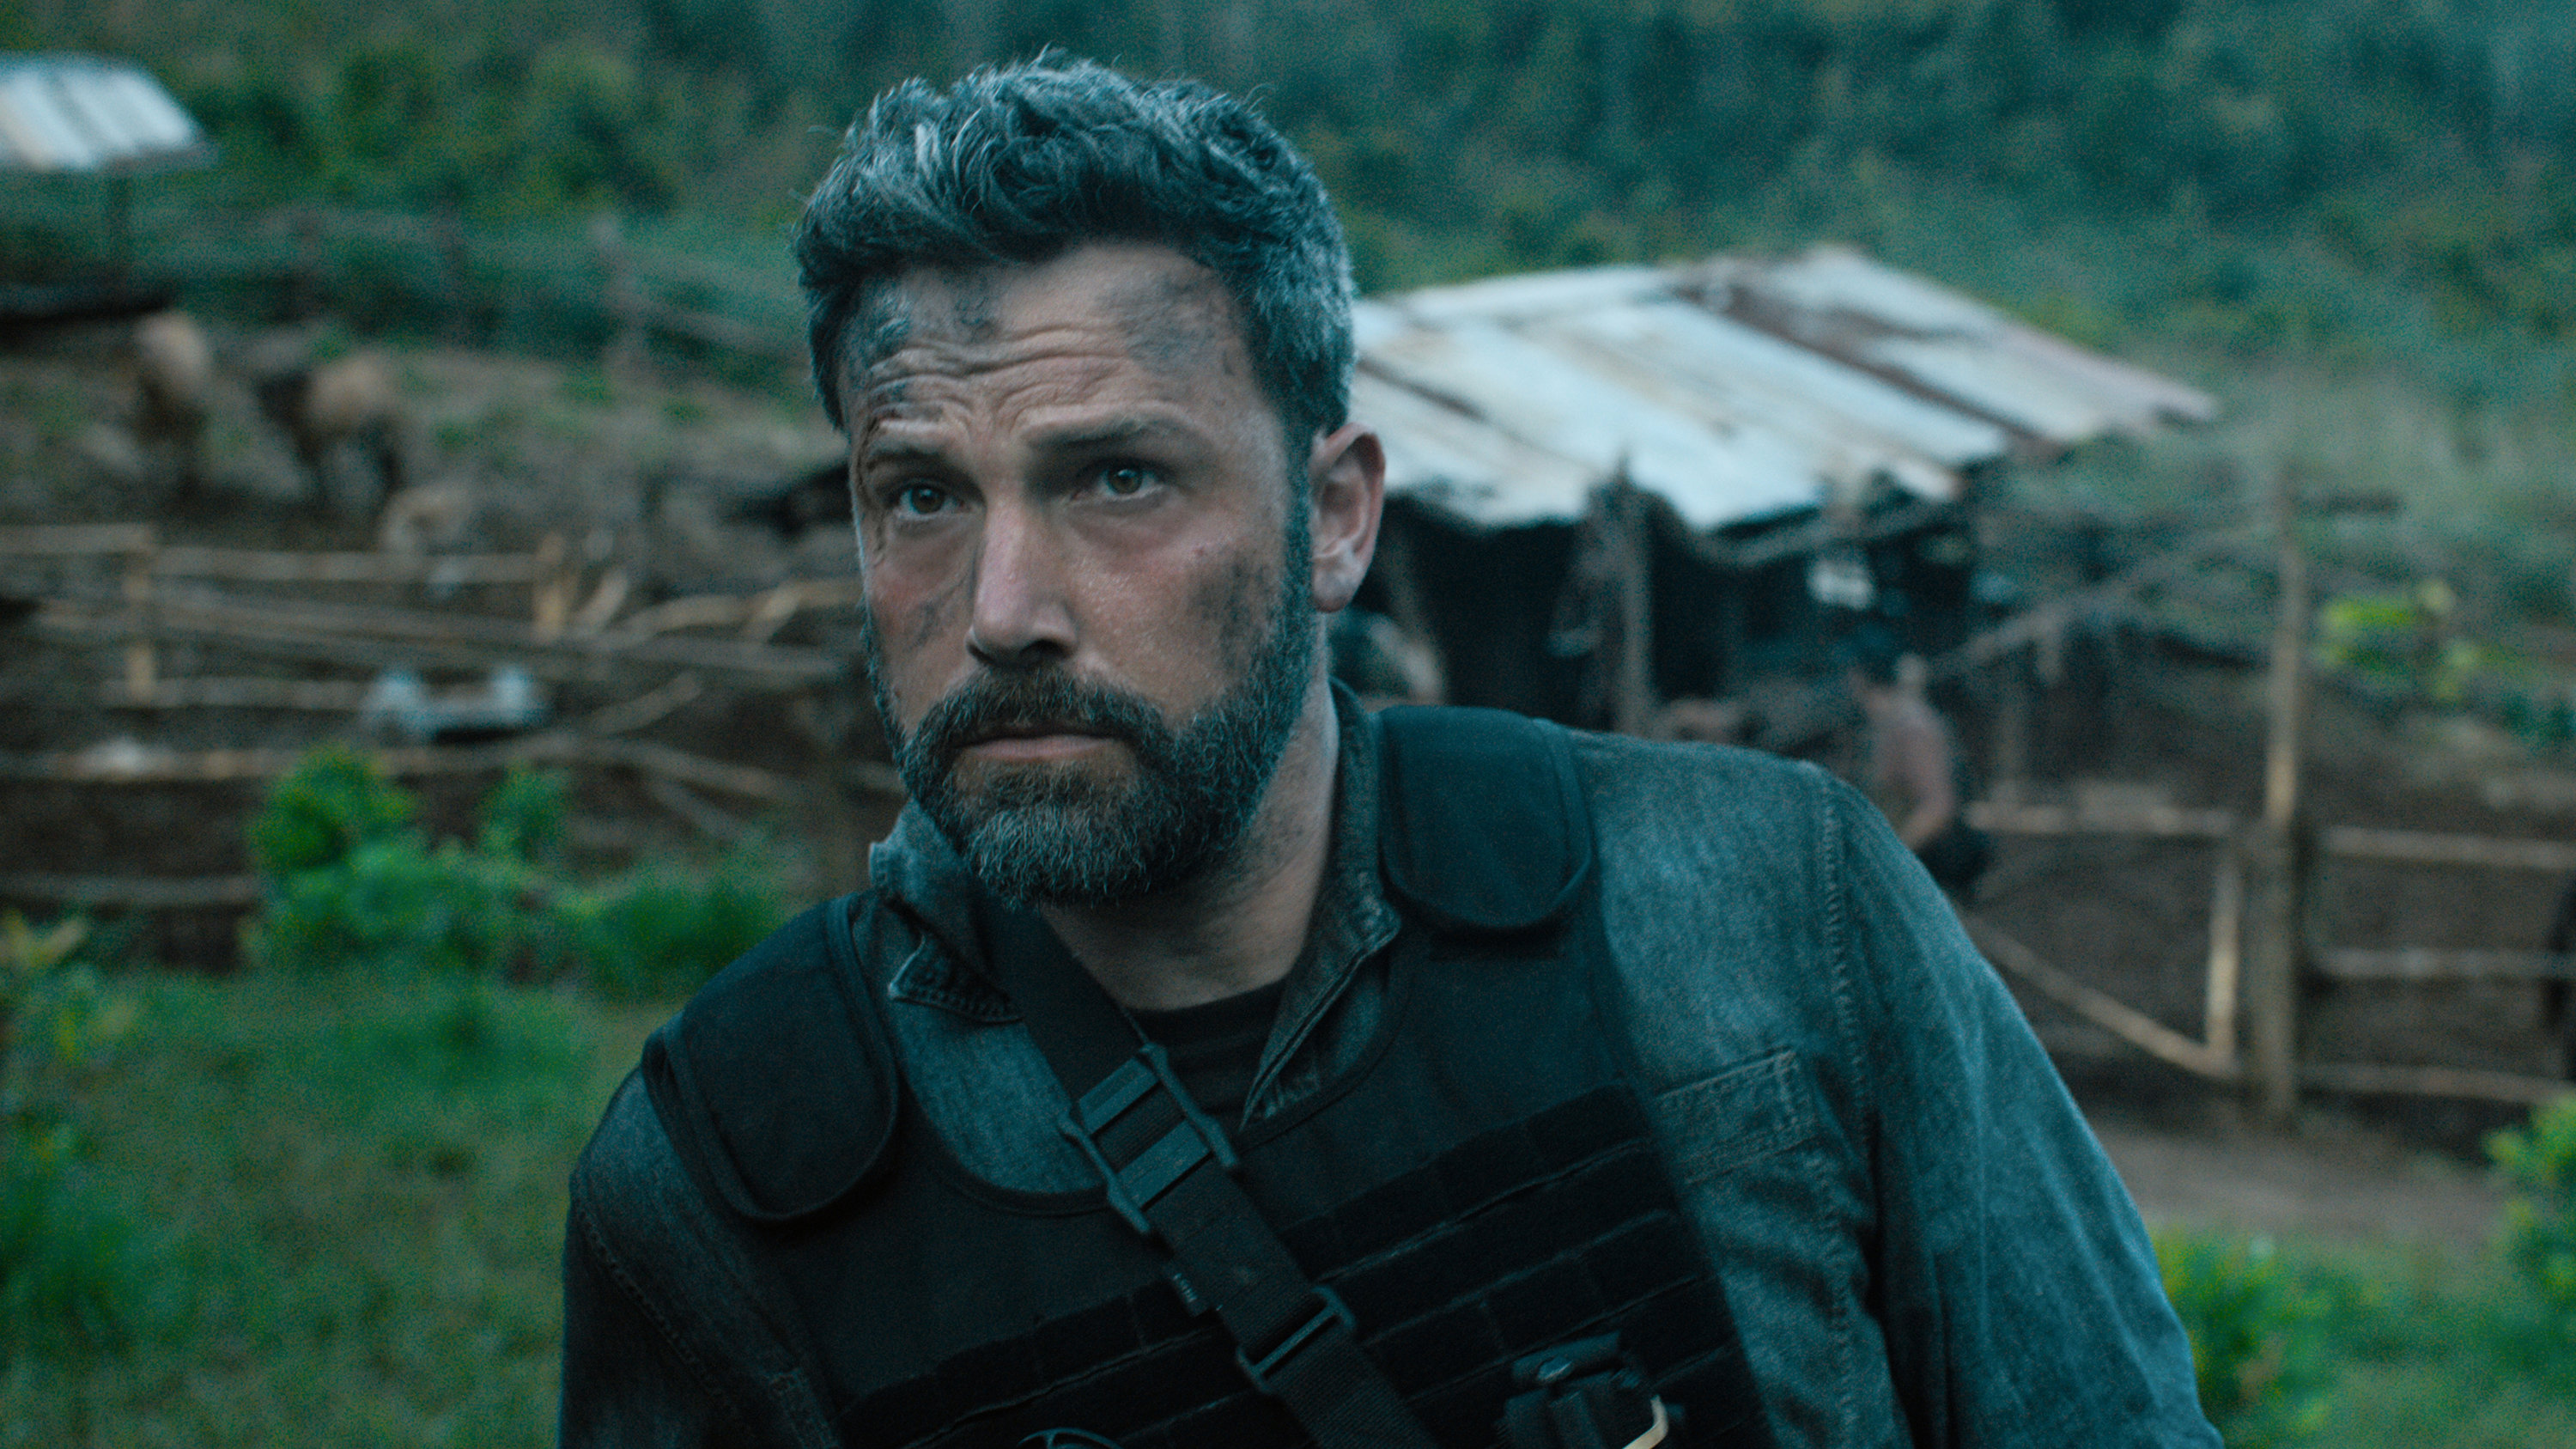 Ben Affleck New Movie: Upcoming Movies / TV Shows (2019, 2020)